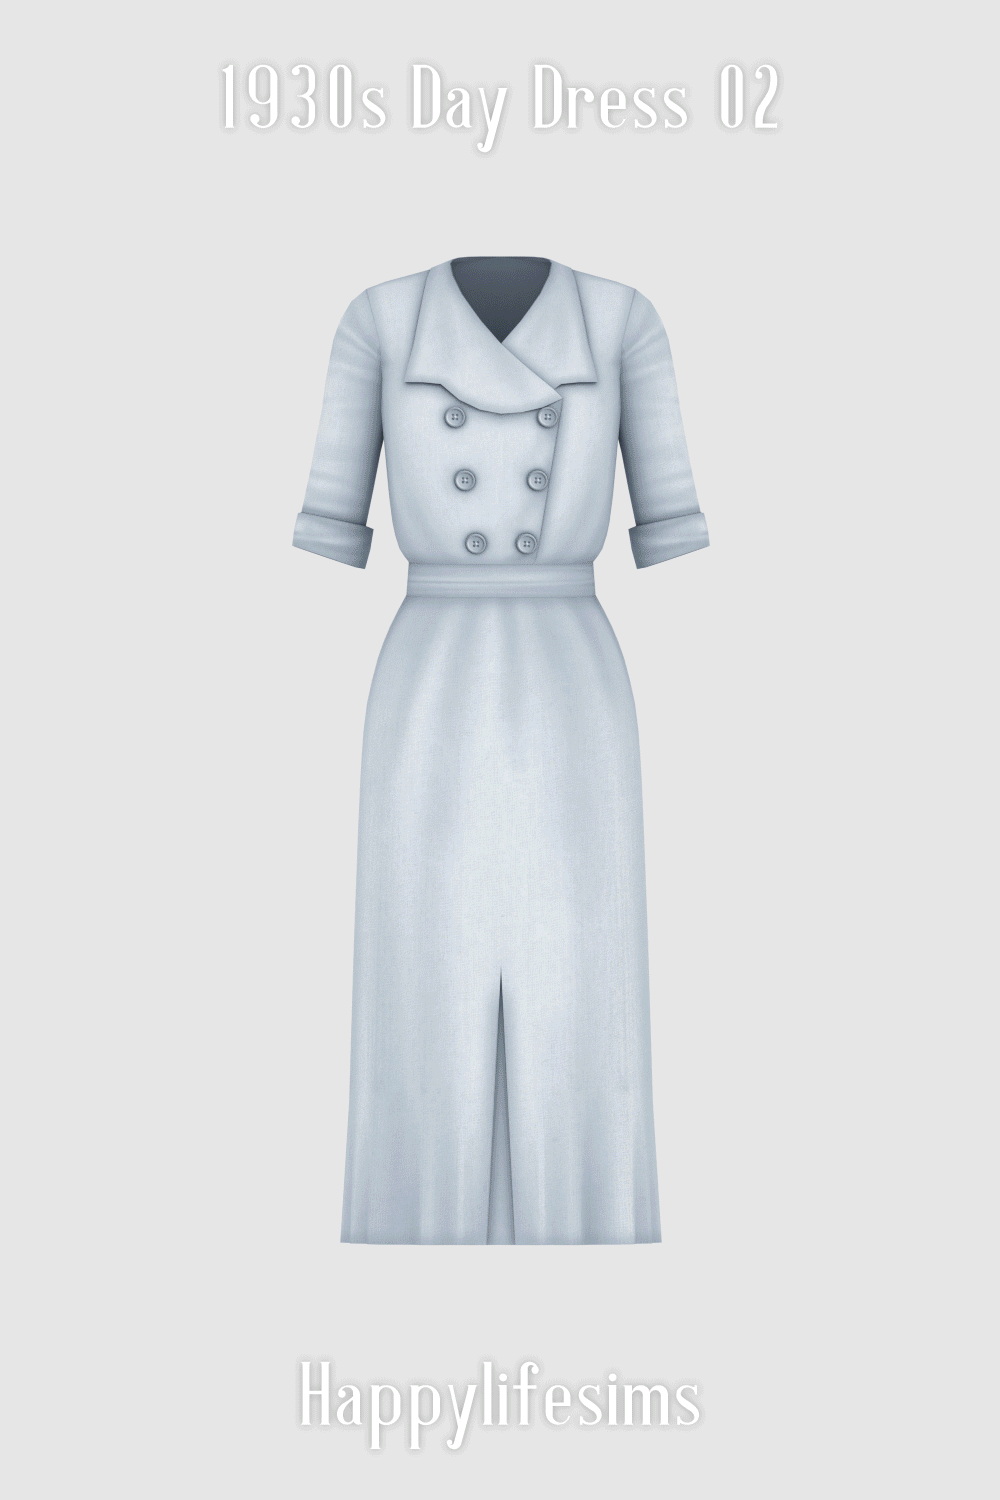 1930s Day Dress 02 at Happy Life Sims » Sims 4 Updates